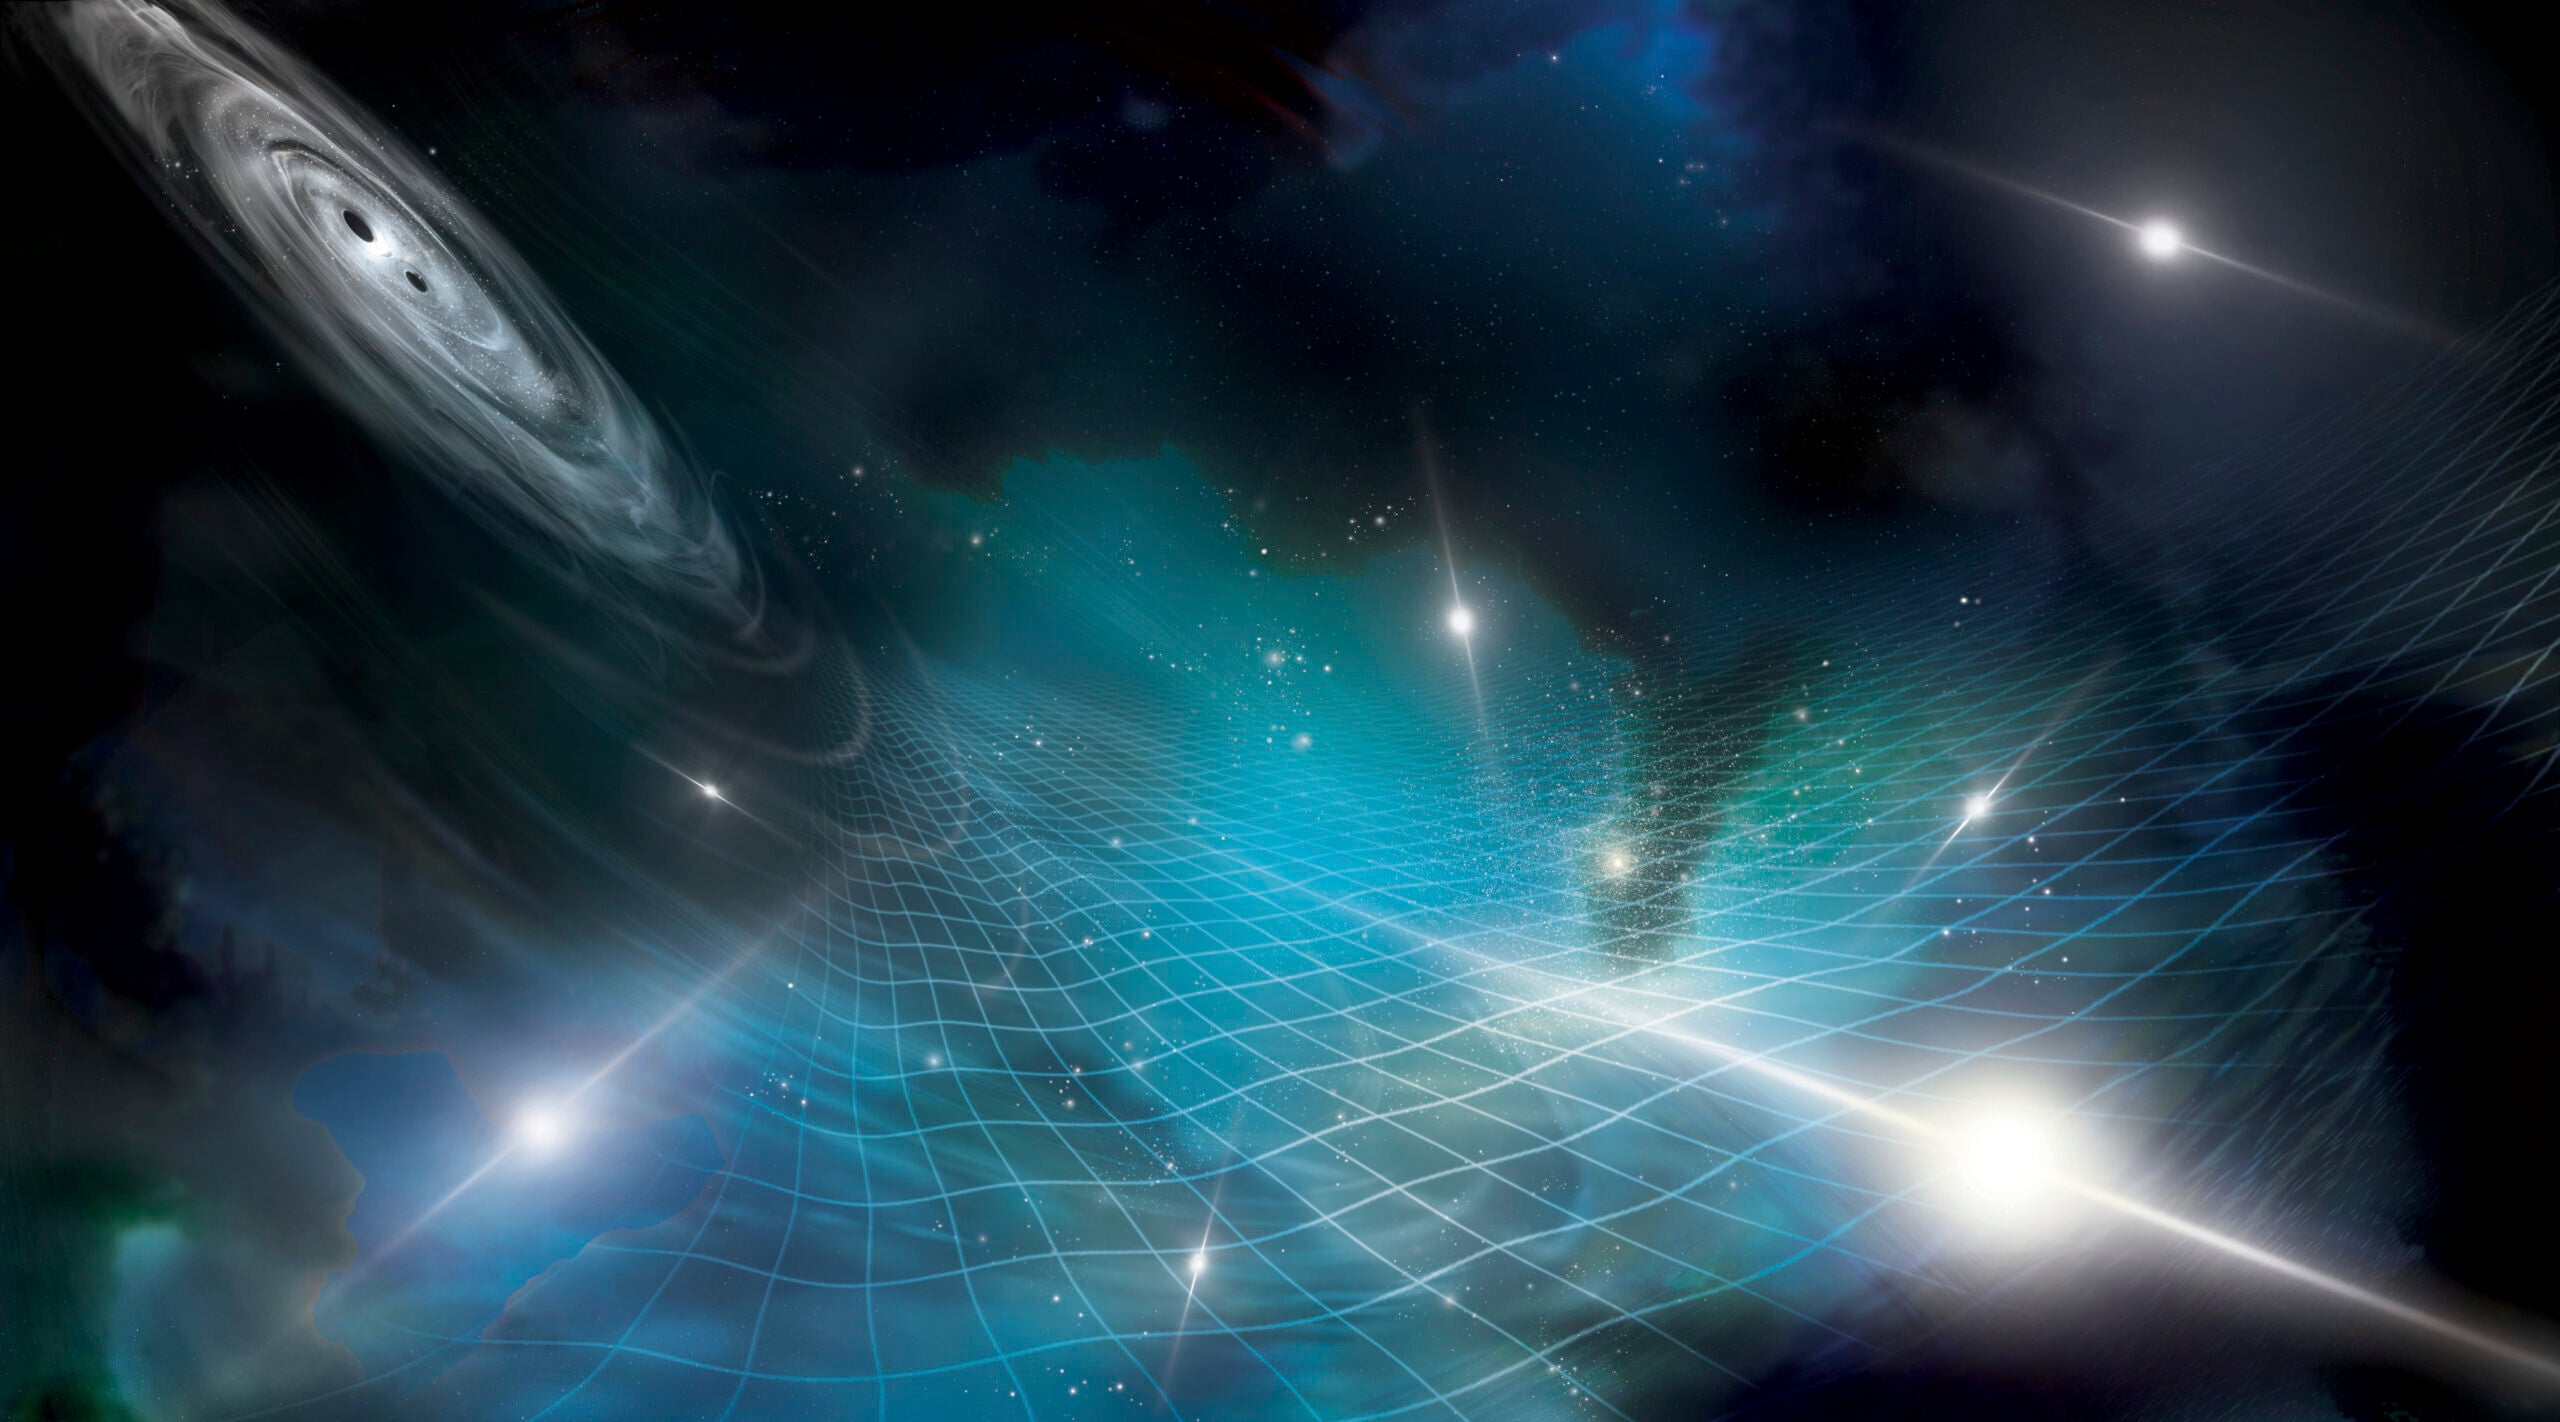 Gravitational waves stretching and squeezing space-time in the universe.